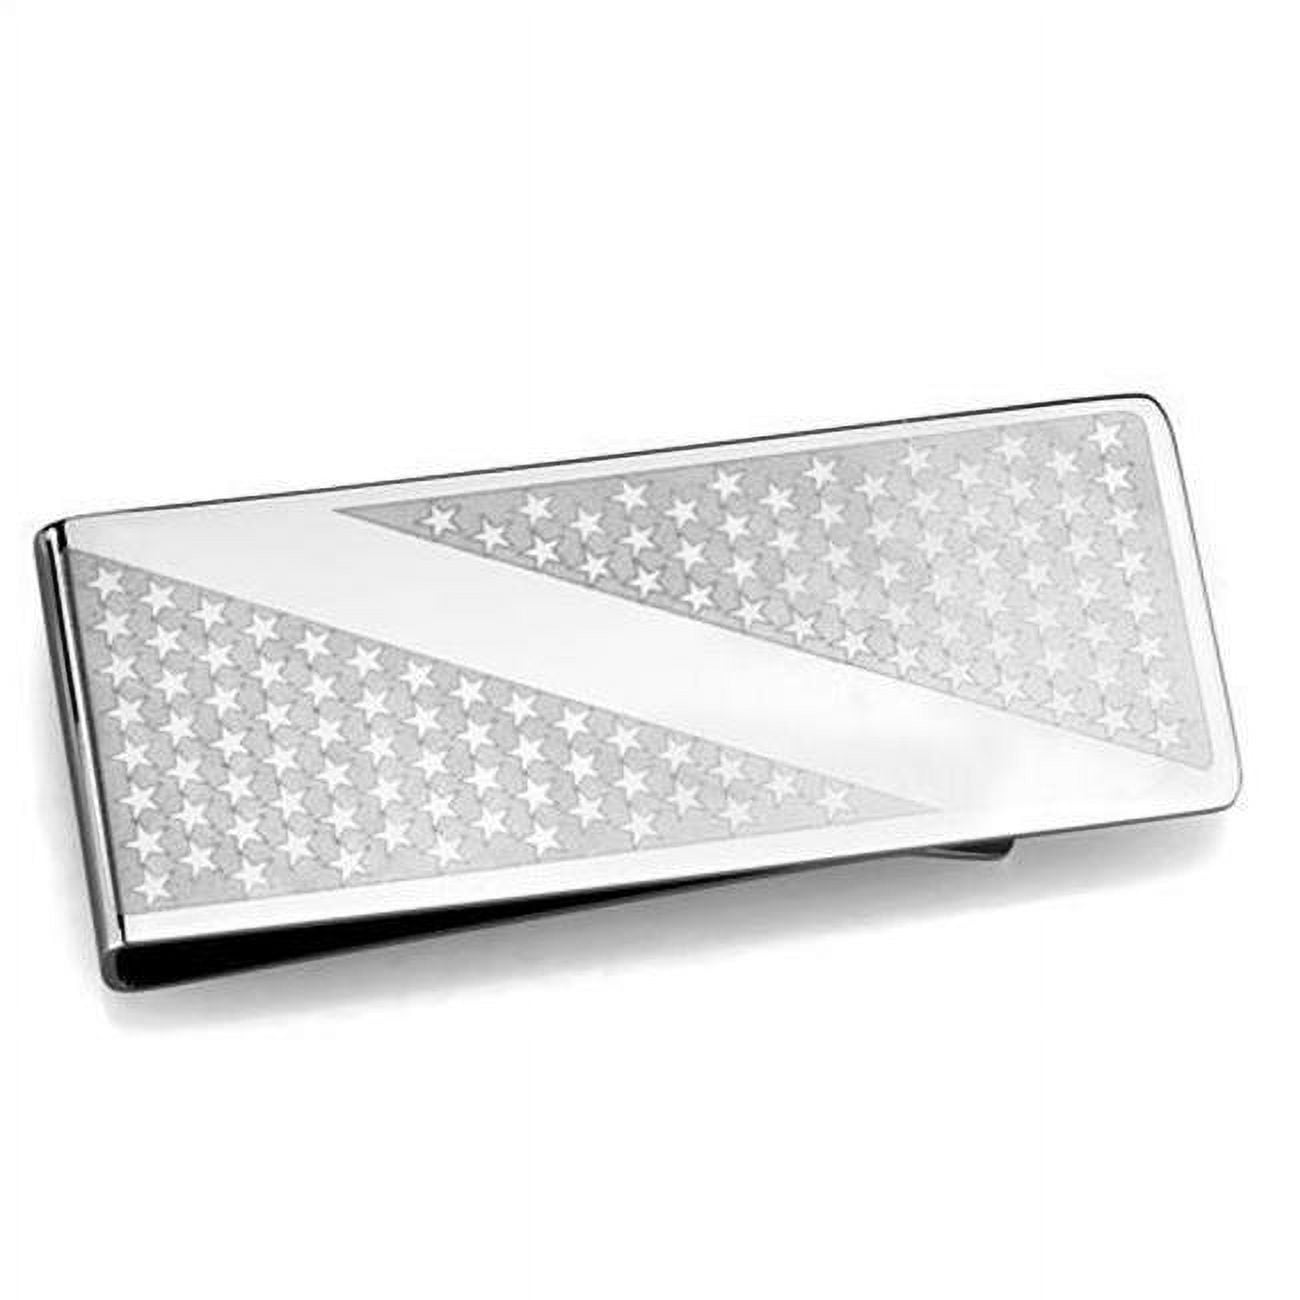 Picture of Alamode TK2080 Men High Polished Stainless Steel Money Clip with No Stone in No Stone